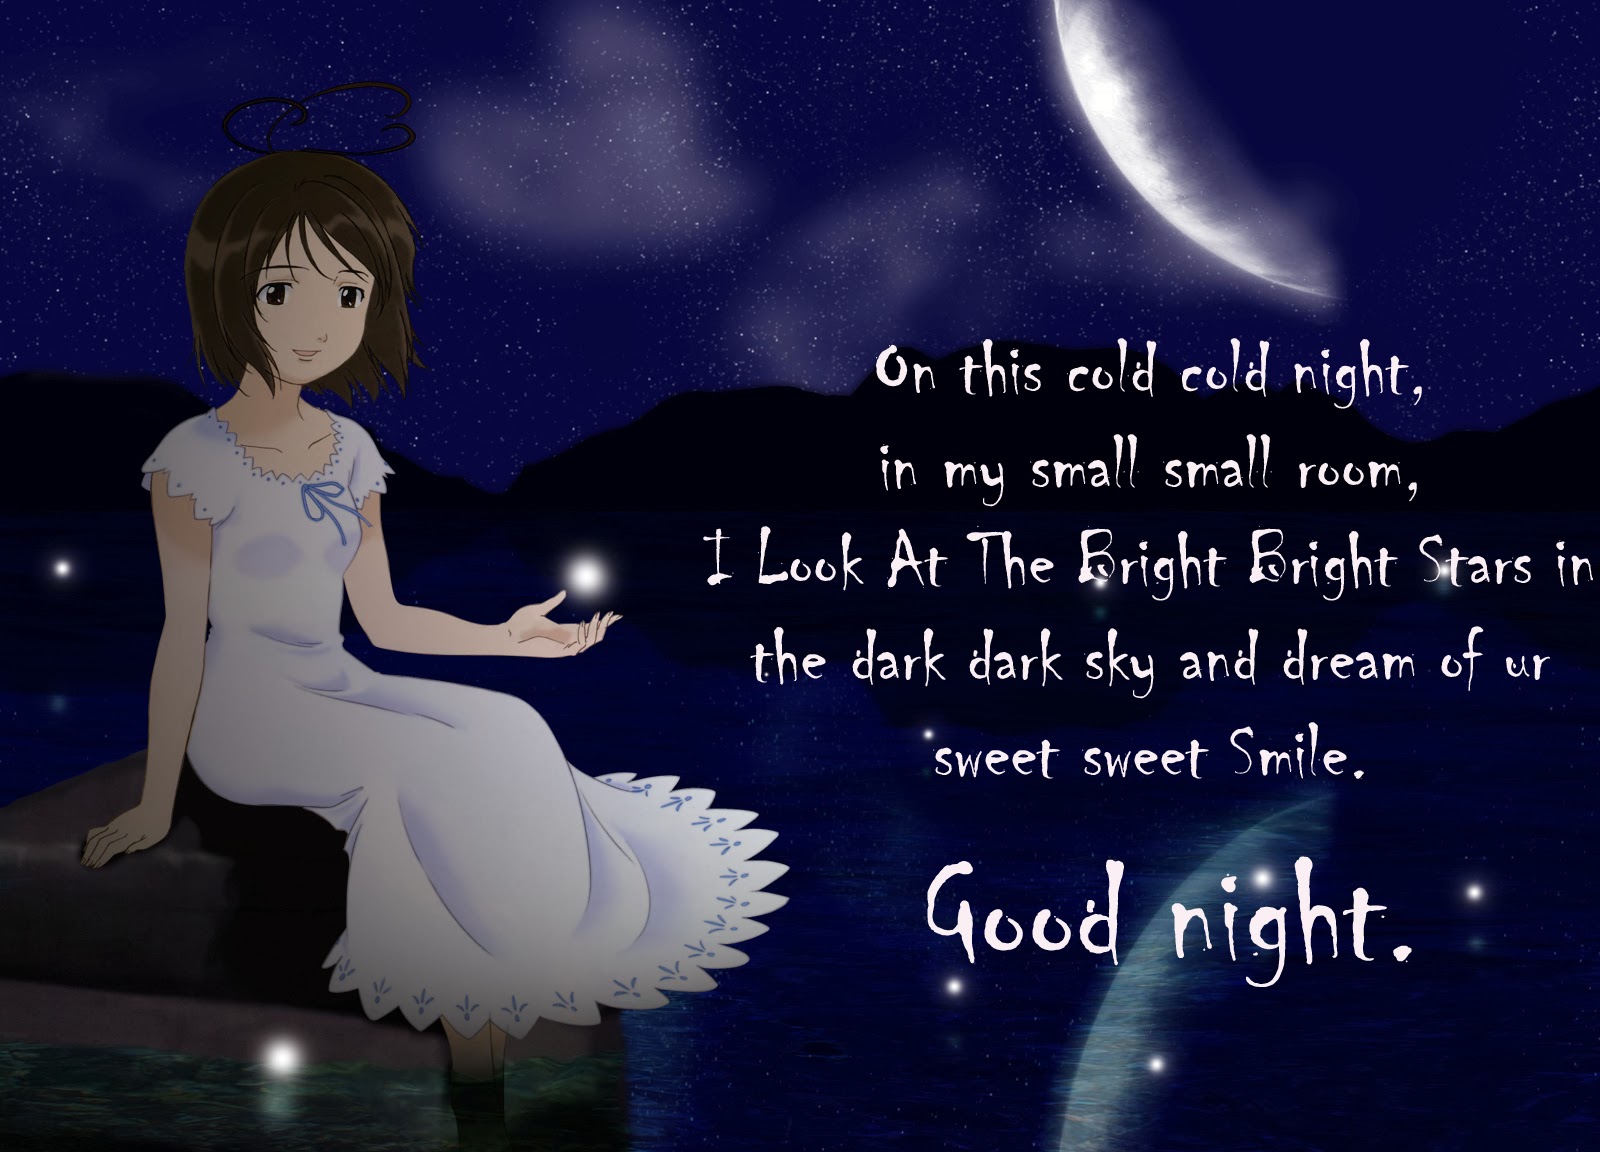 Good Night HD Wallpapers and Images. girl wishing good night